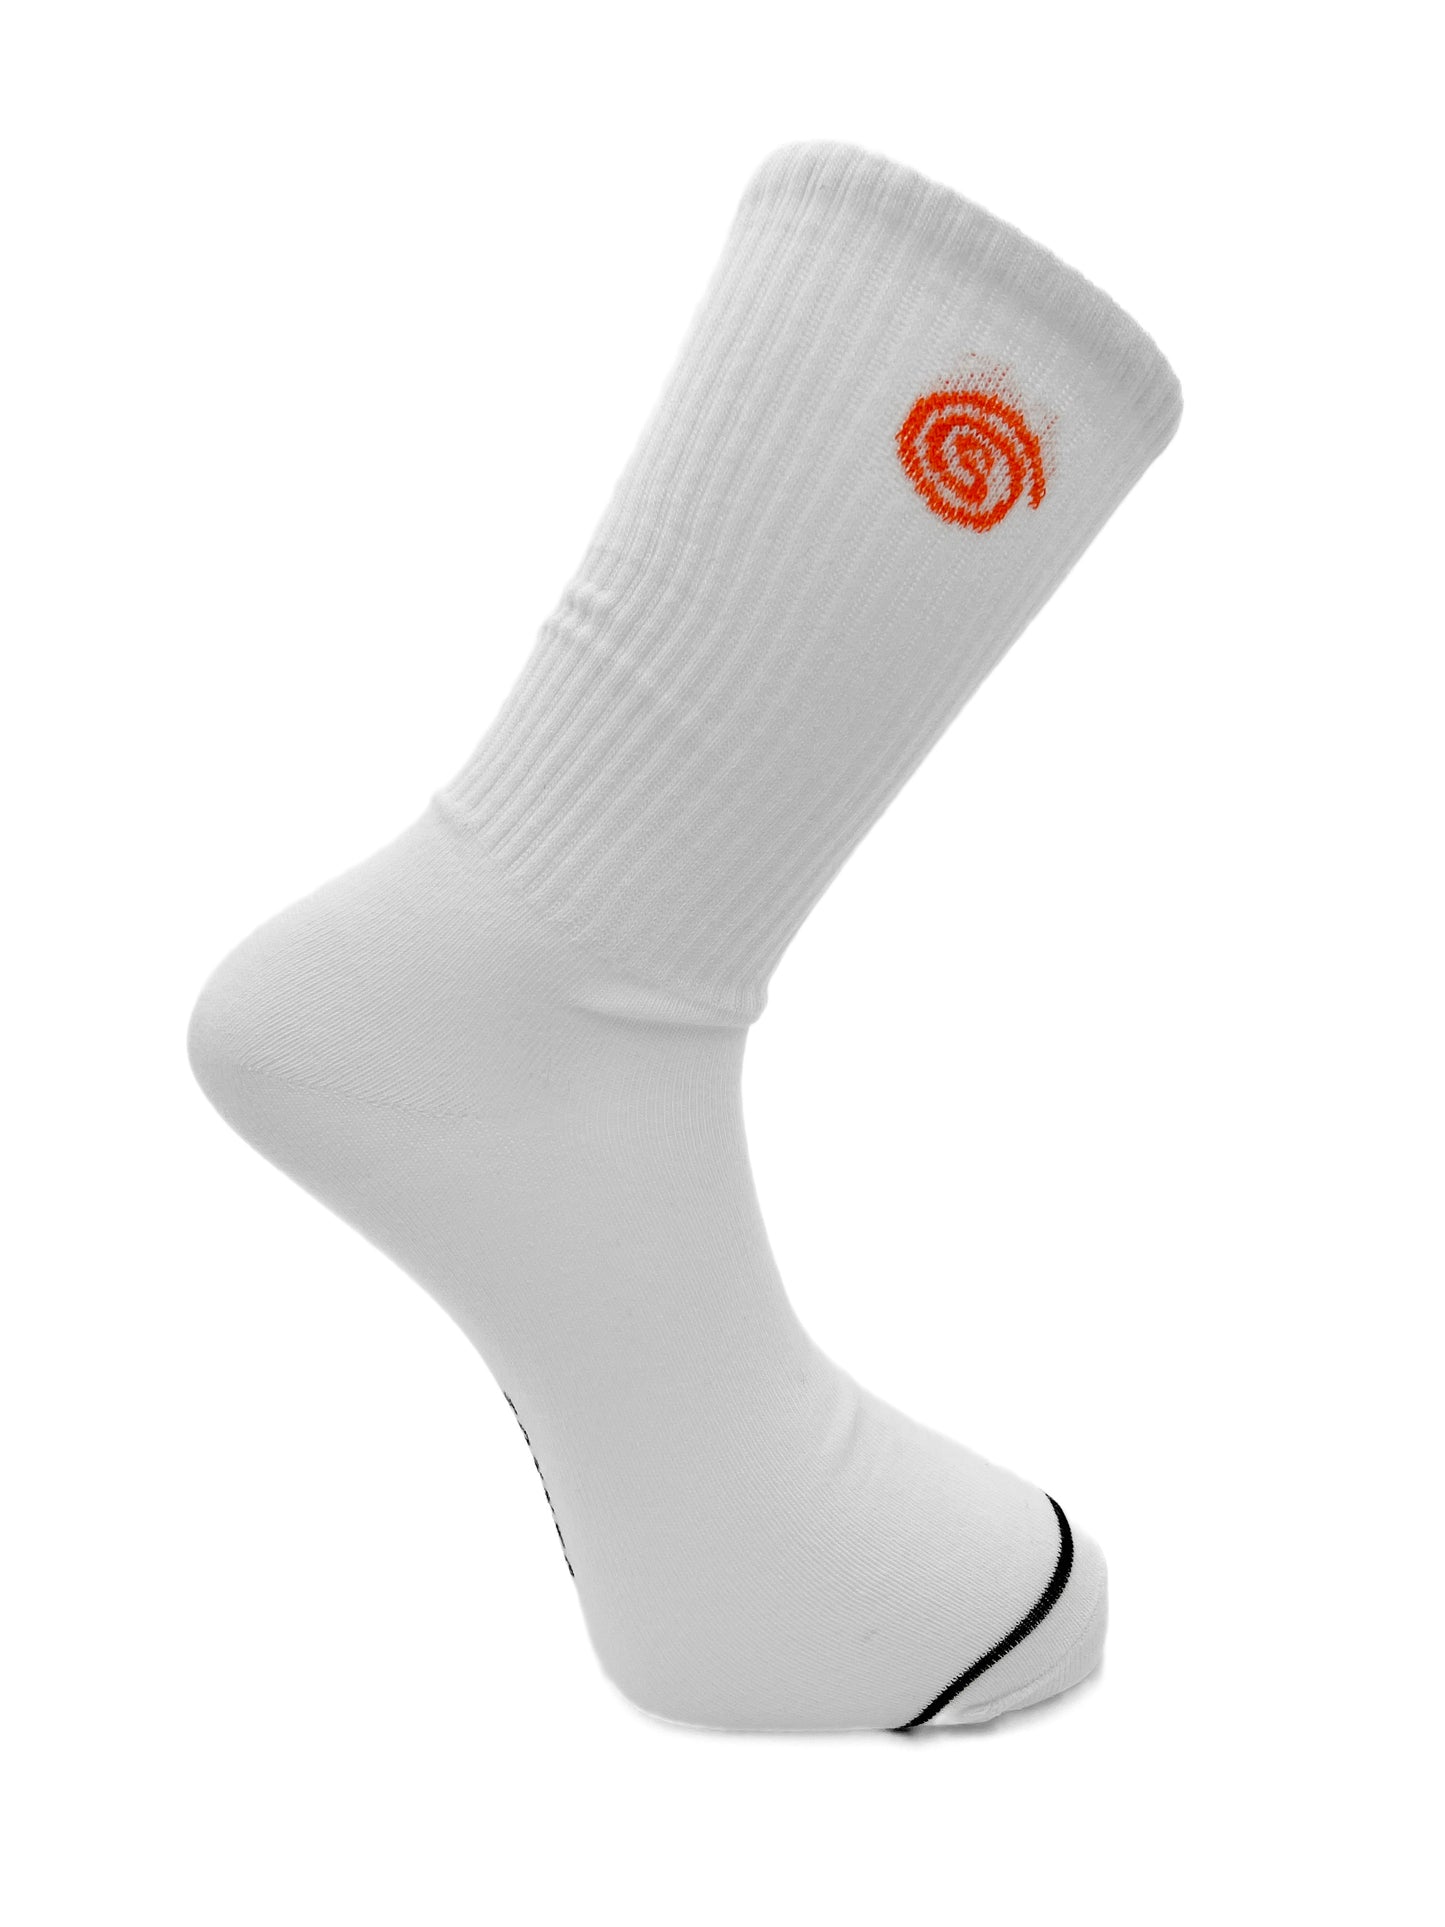 White unisex, fashionable, crew, casual and sports socks - 3 or 6 pairs pack